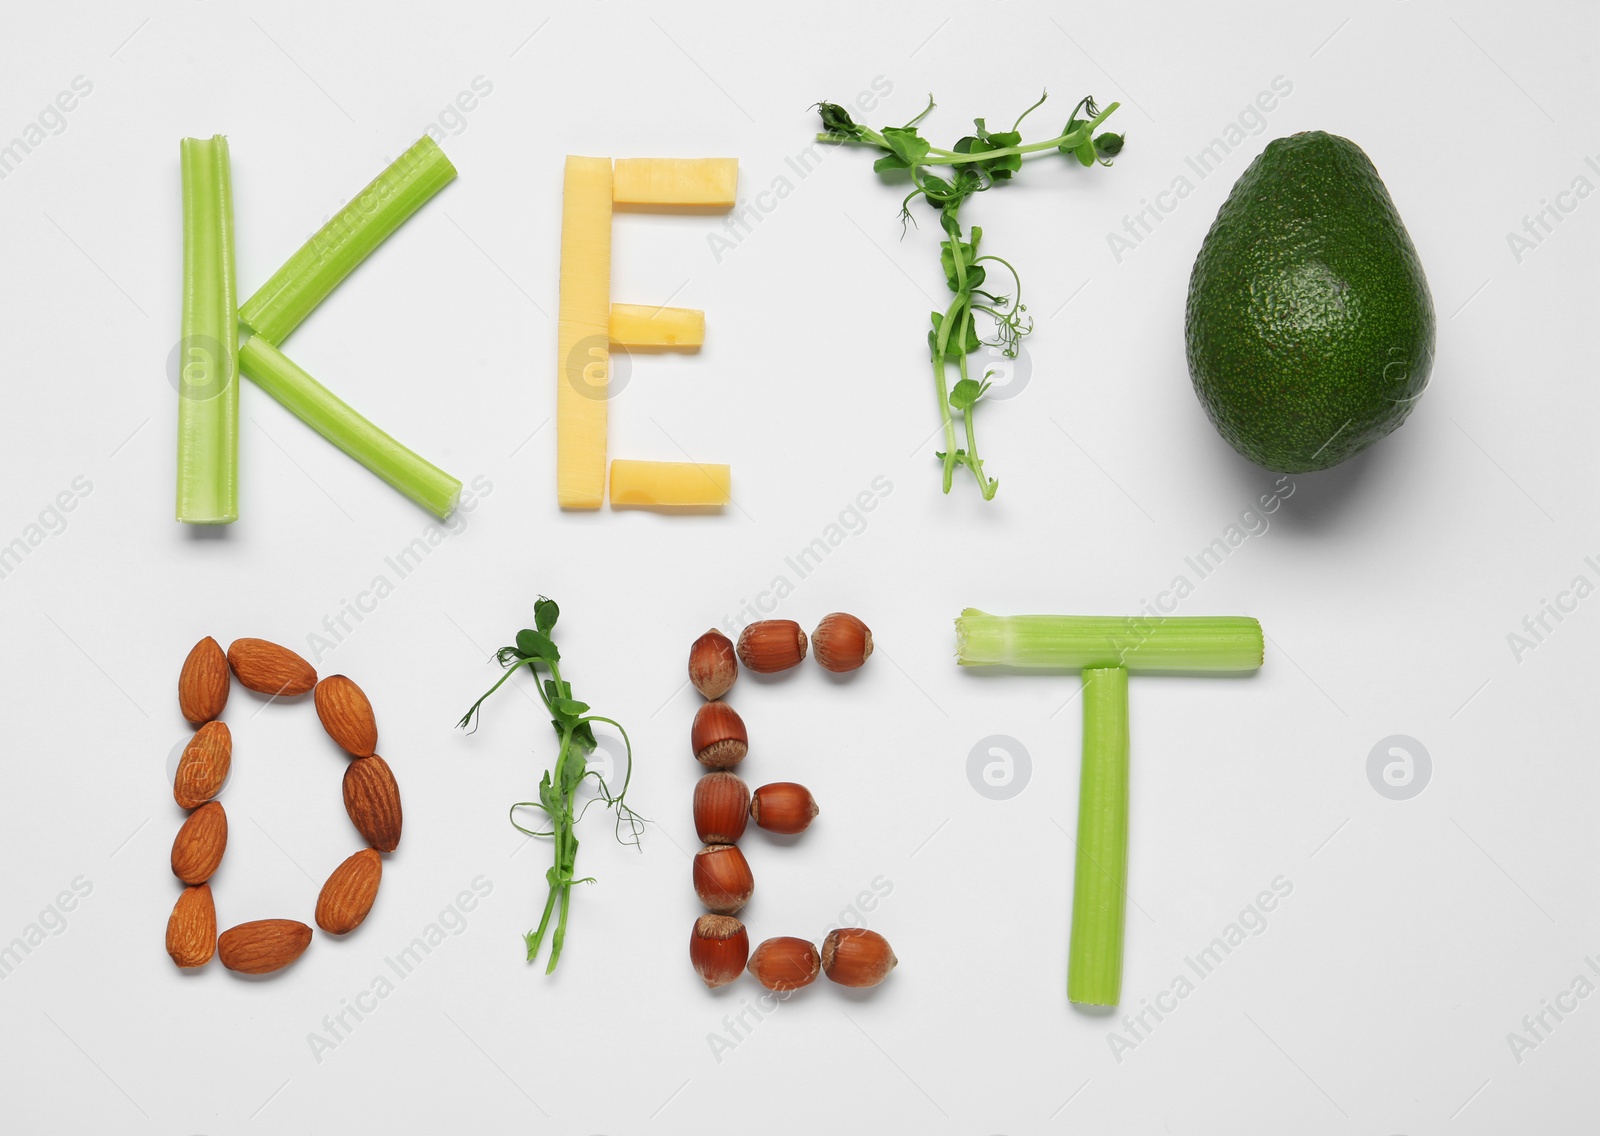 Photo of Phrase Keto Diet made with different on white background, flat lay